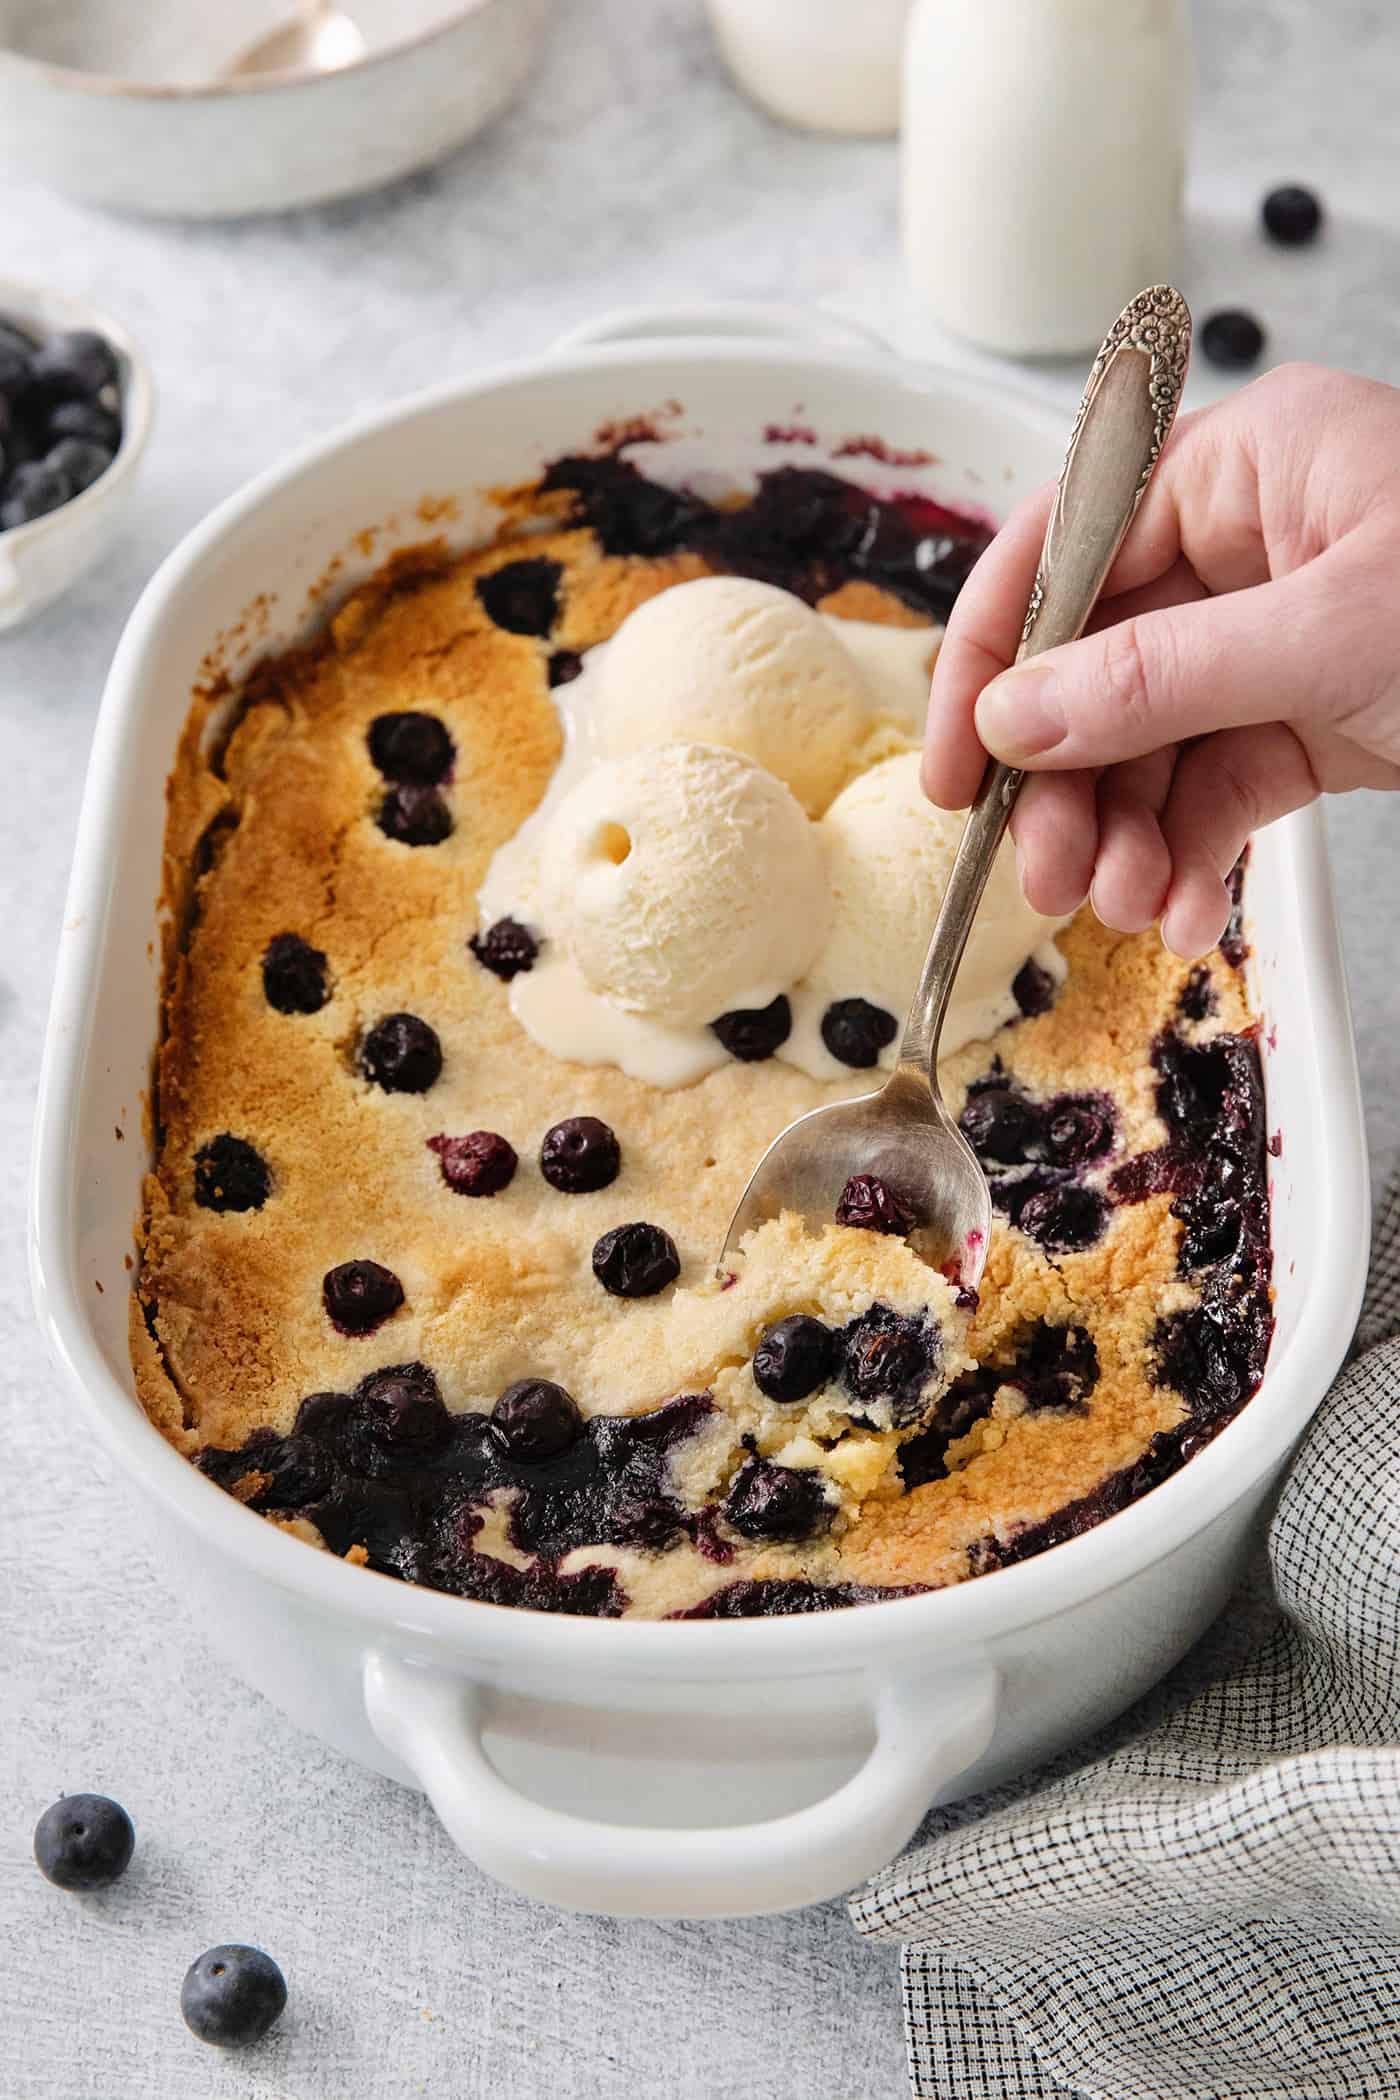 A spoon scoops out a portion of blueberry dump cake.